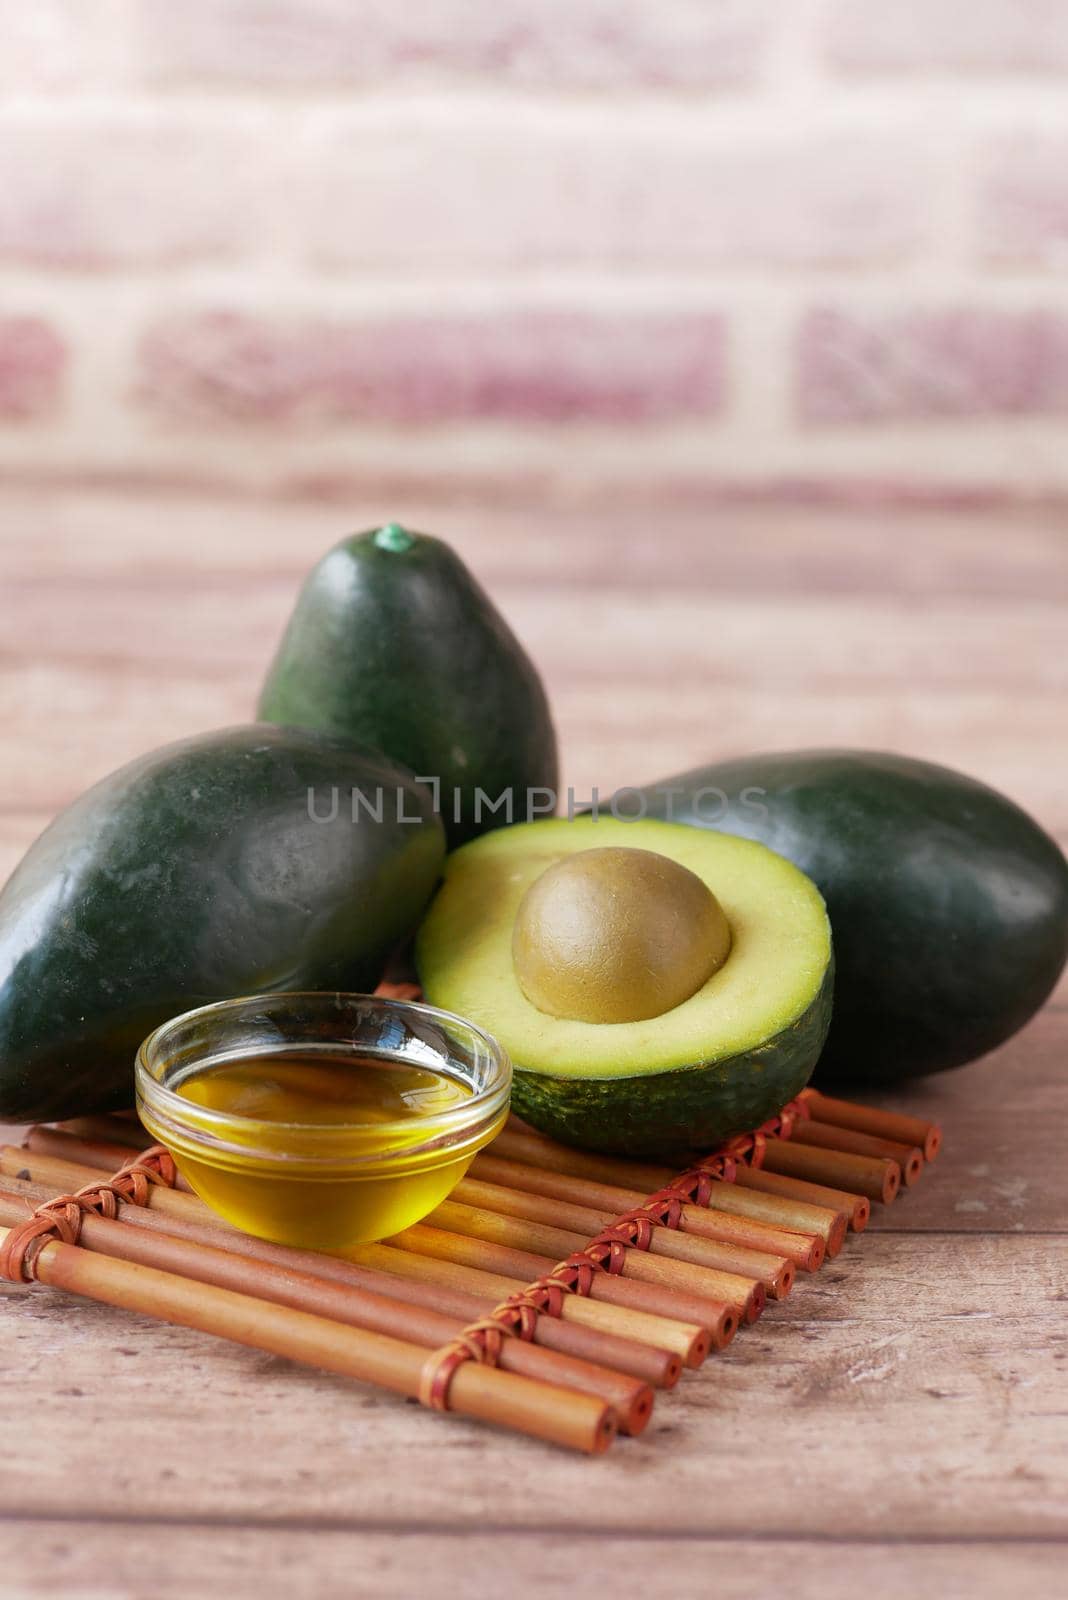 oil and slice of avocado on wooden table by towfiq007